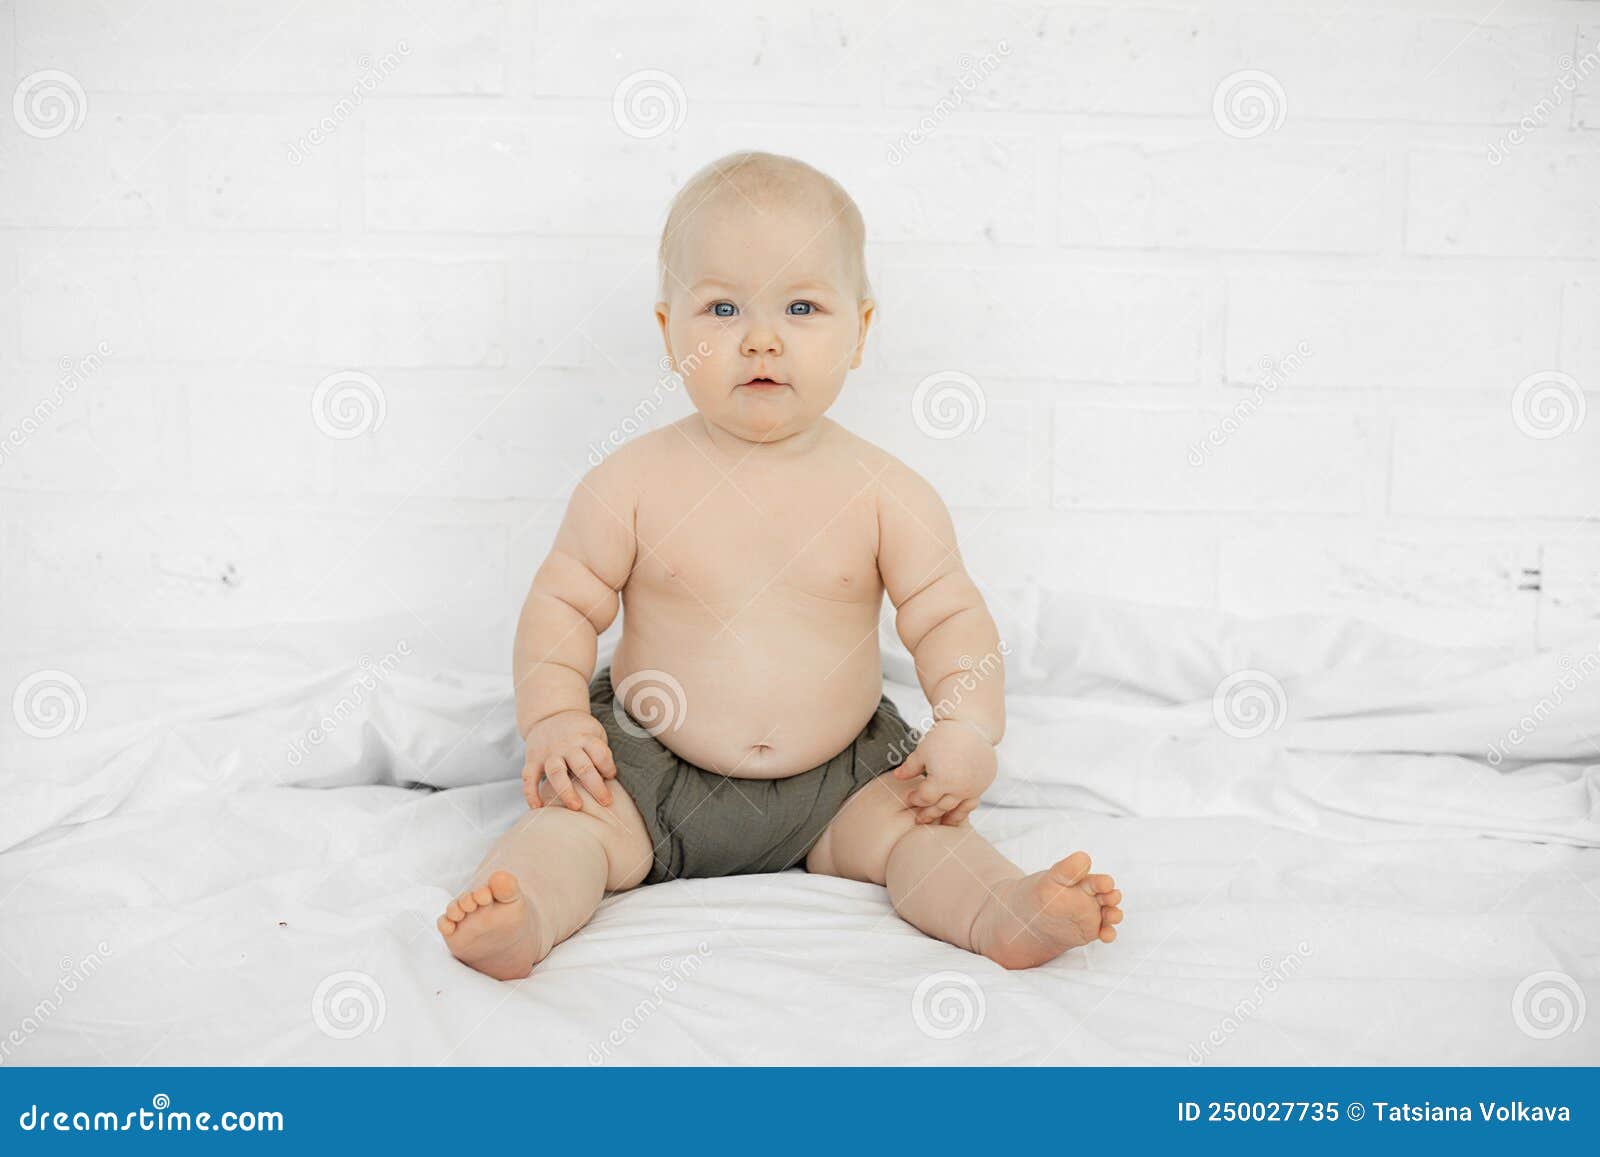 portrait of attractive serious grey-eyed plump cherubic baby infant toddler wearing grey pants sitting on white bed.